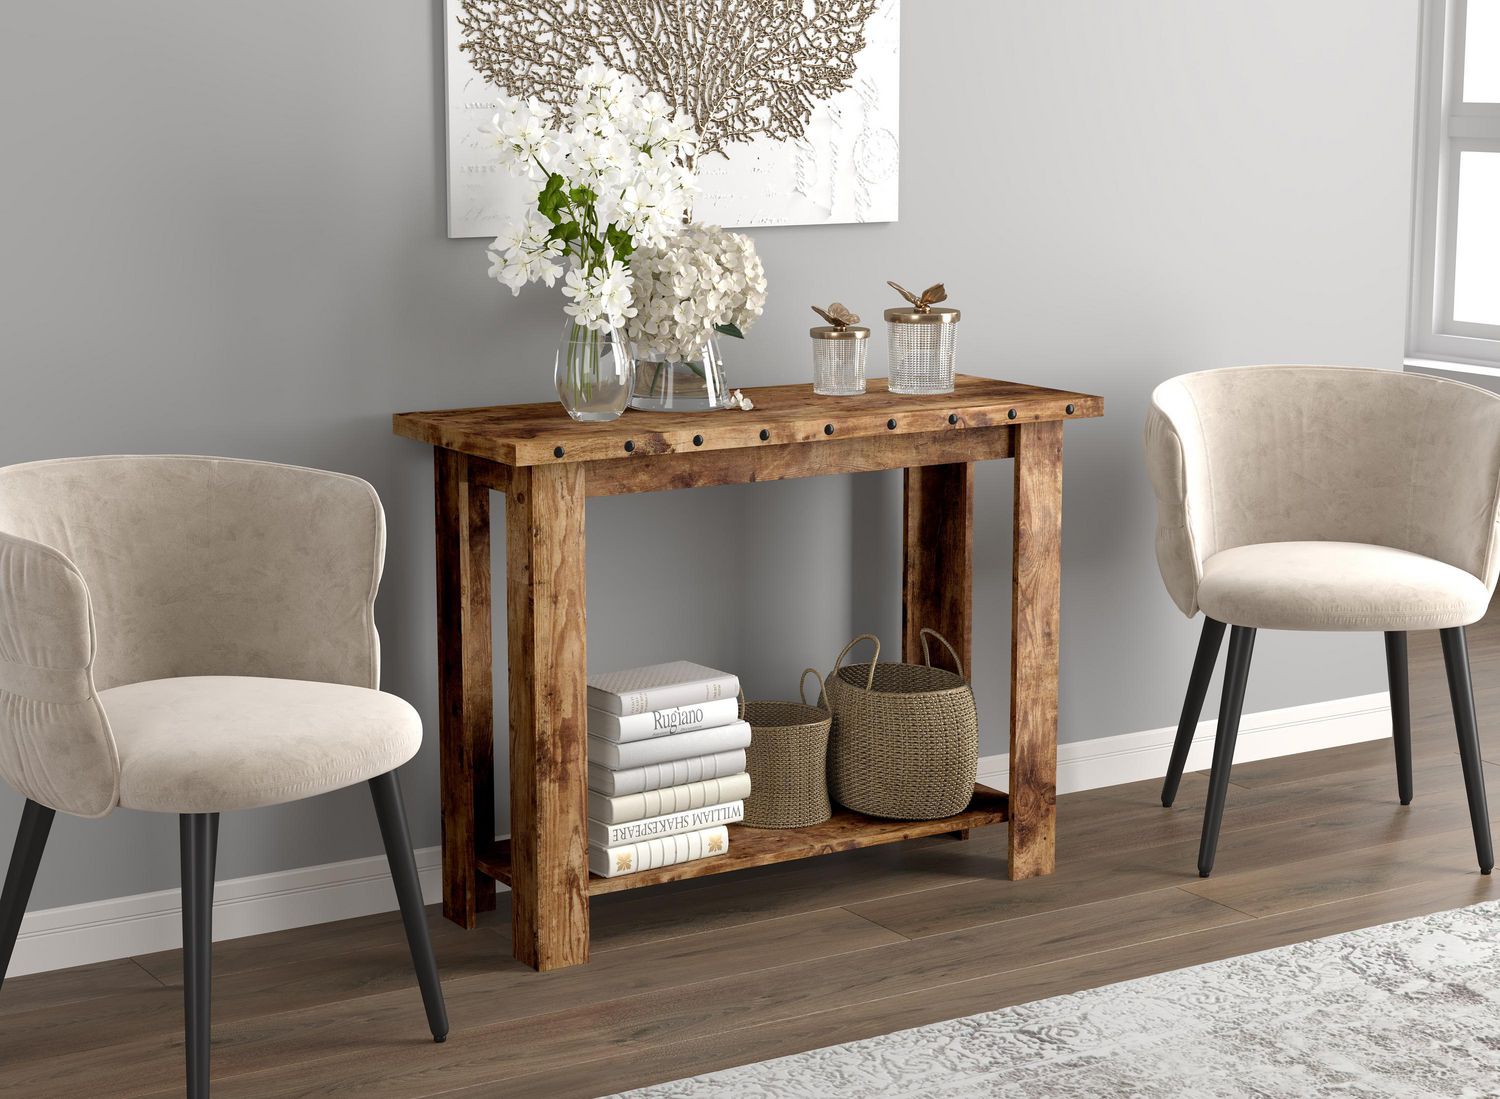 Saf Co Console Table 39l Brown, Reclaimed Wood Console Table Canada